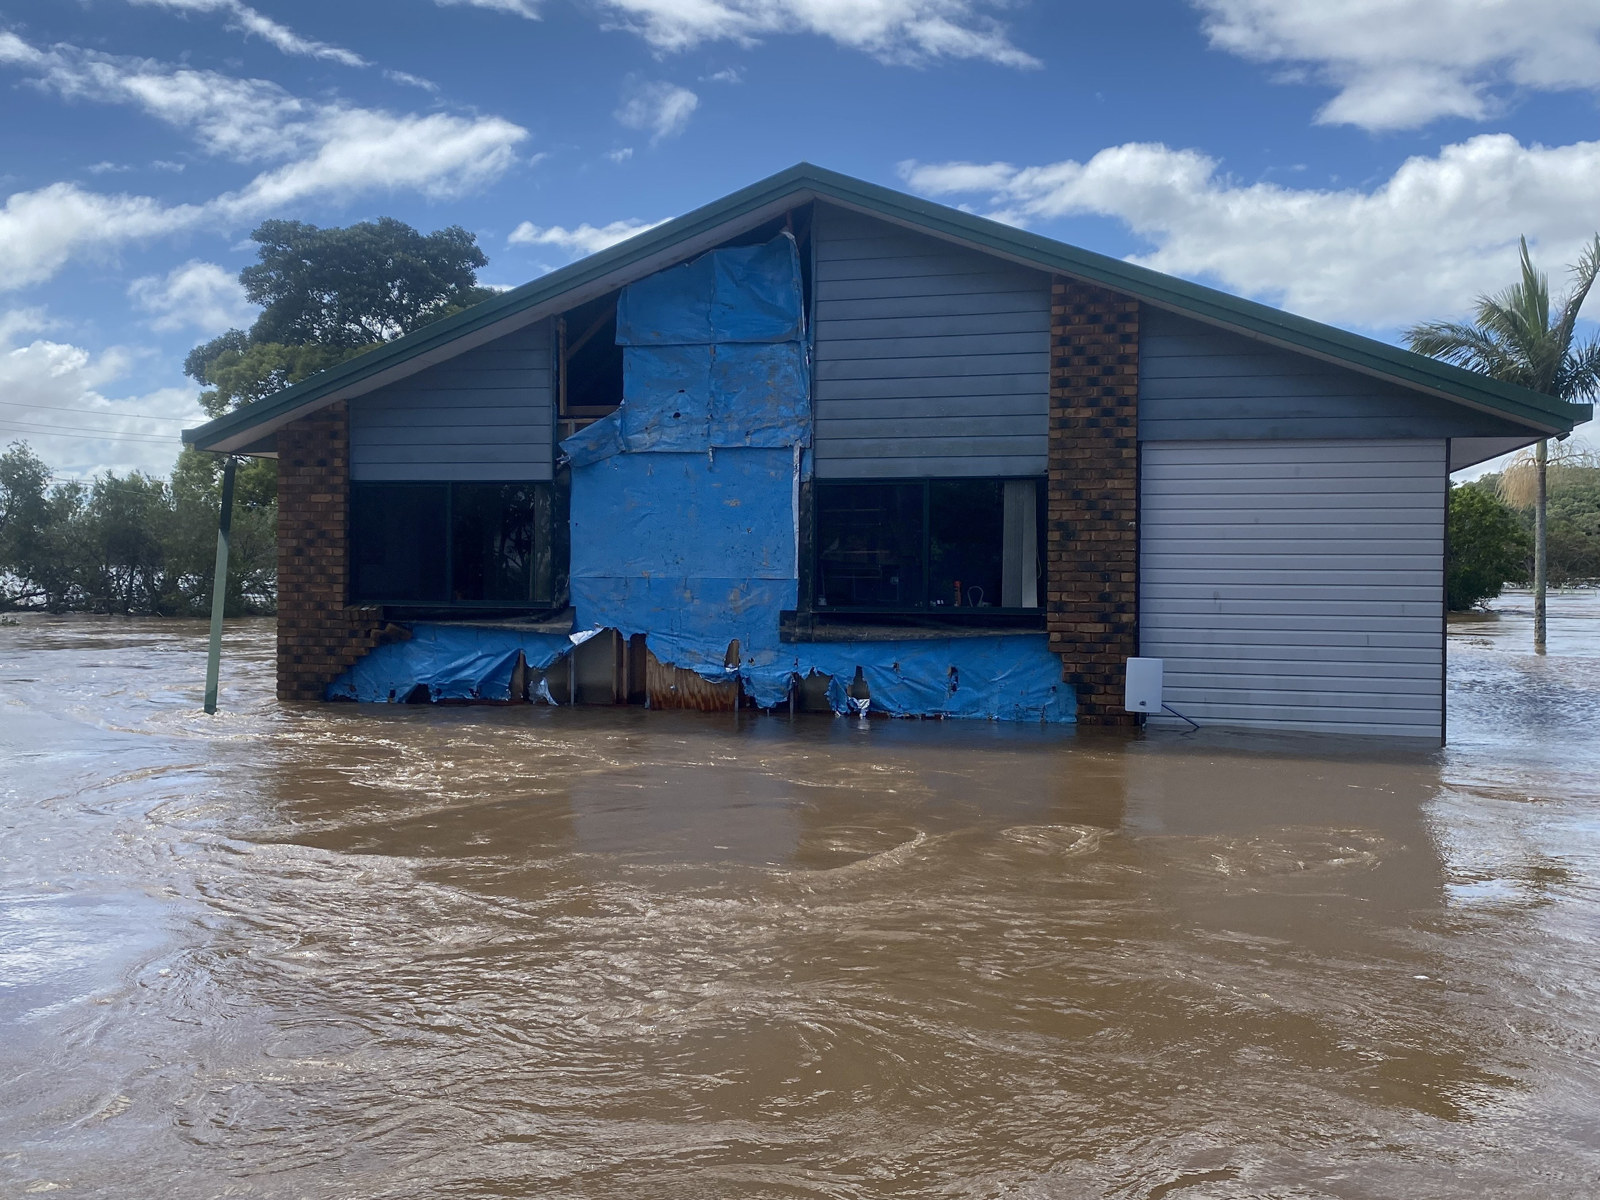 External damage caused by the NSW floods in 2022 in the Broadwater area (submission 0600)